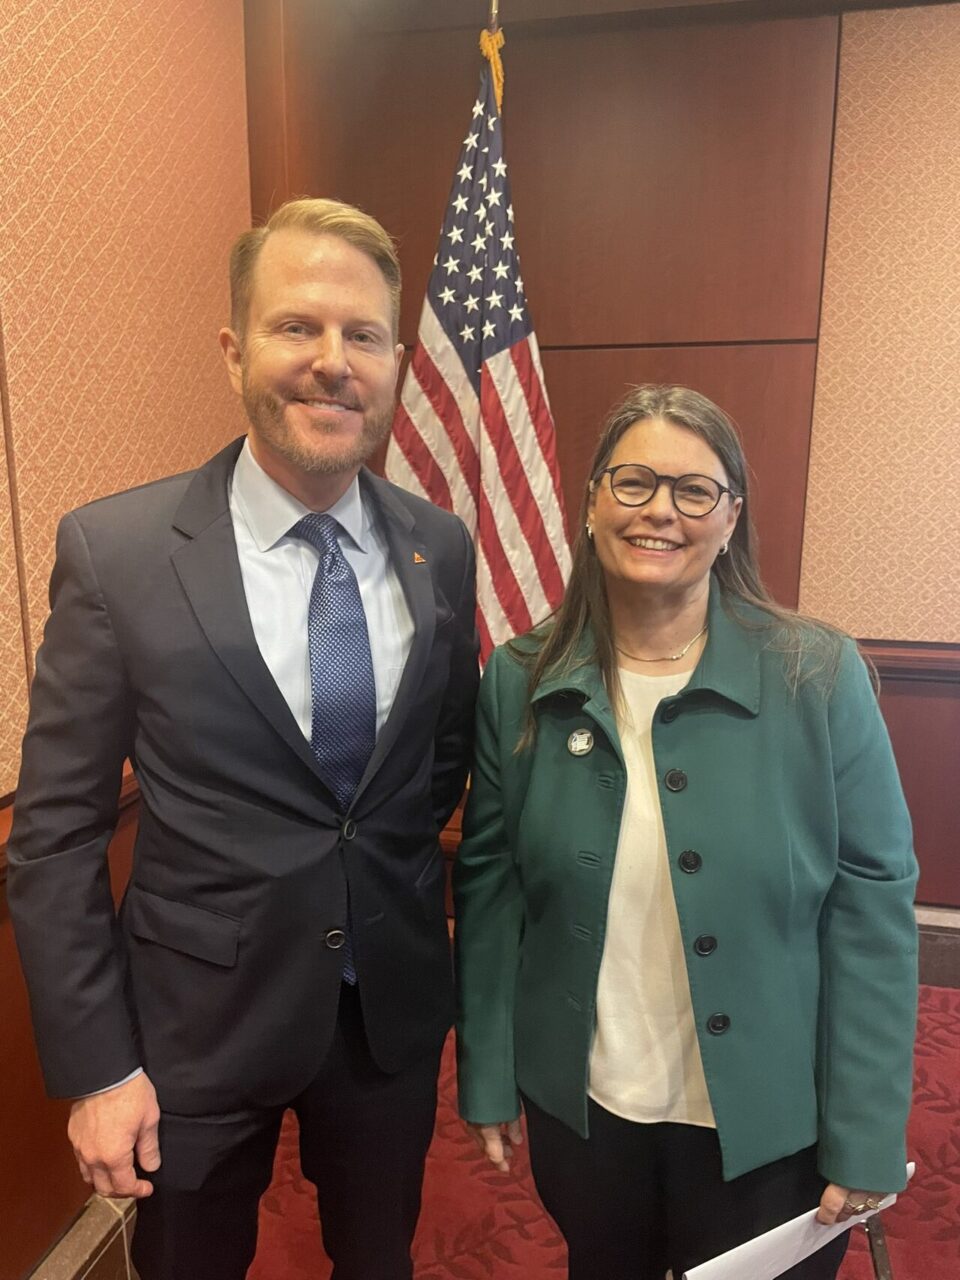 Lisa A. Lacasse: Honored to host a hearing on Capitol Hill alongside US Pharmacopeia discussing ‘What causes drug shortages and how to solve them